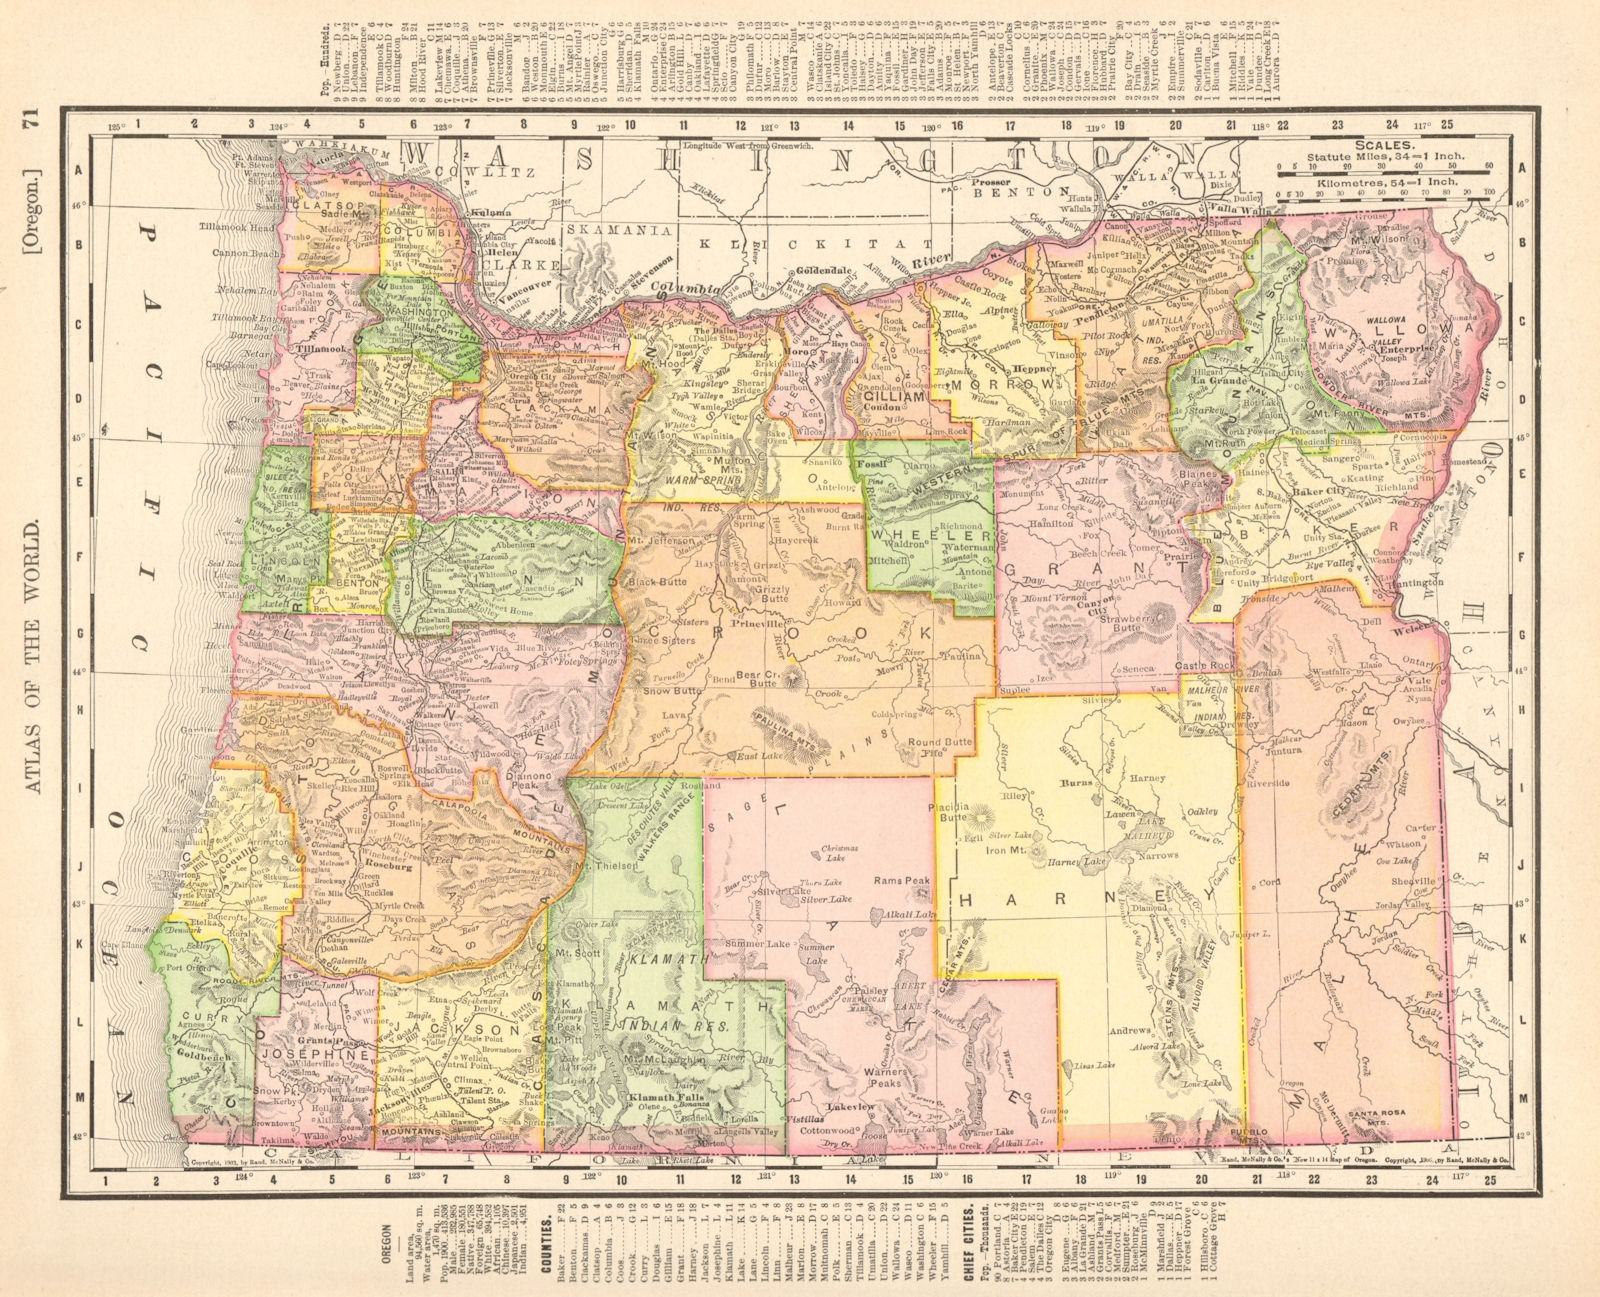 Oregon state map showing counties. RAND MCNALLY 1906 old antique chart